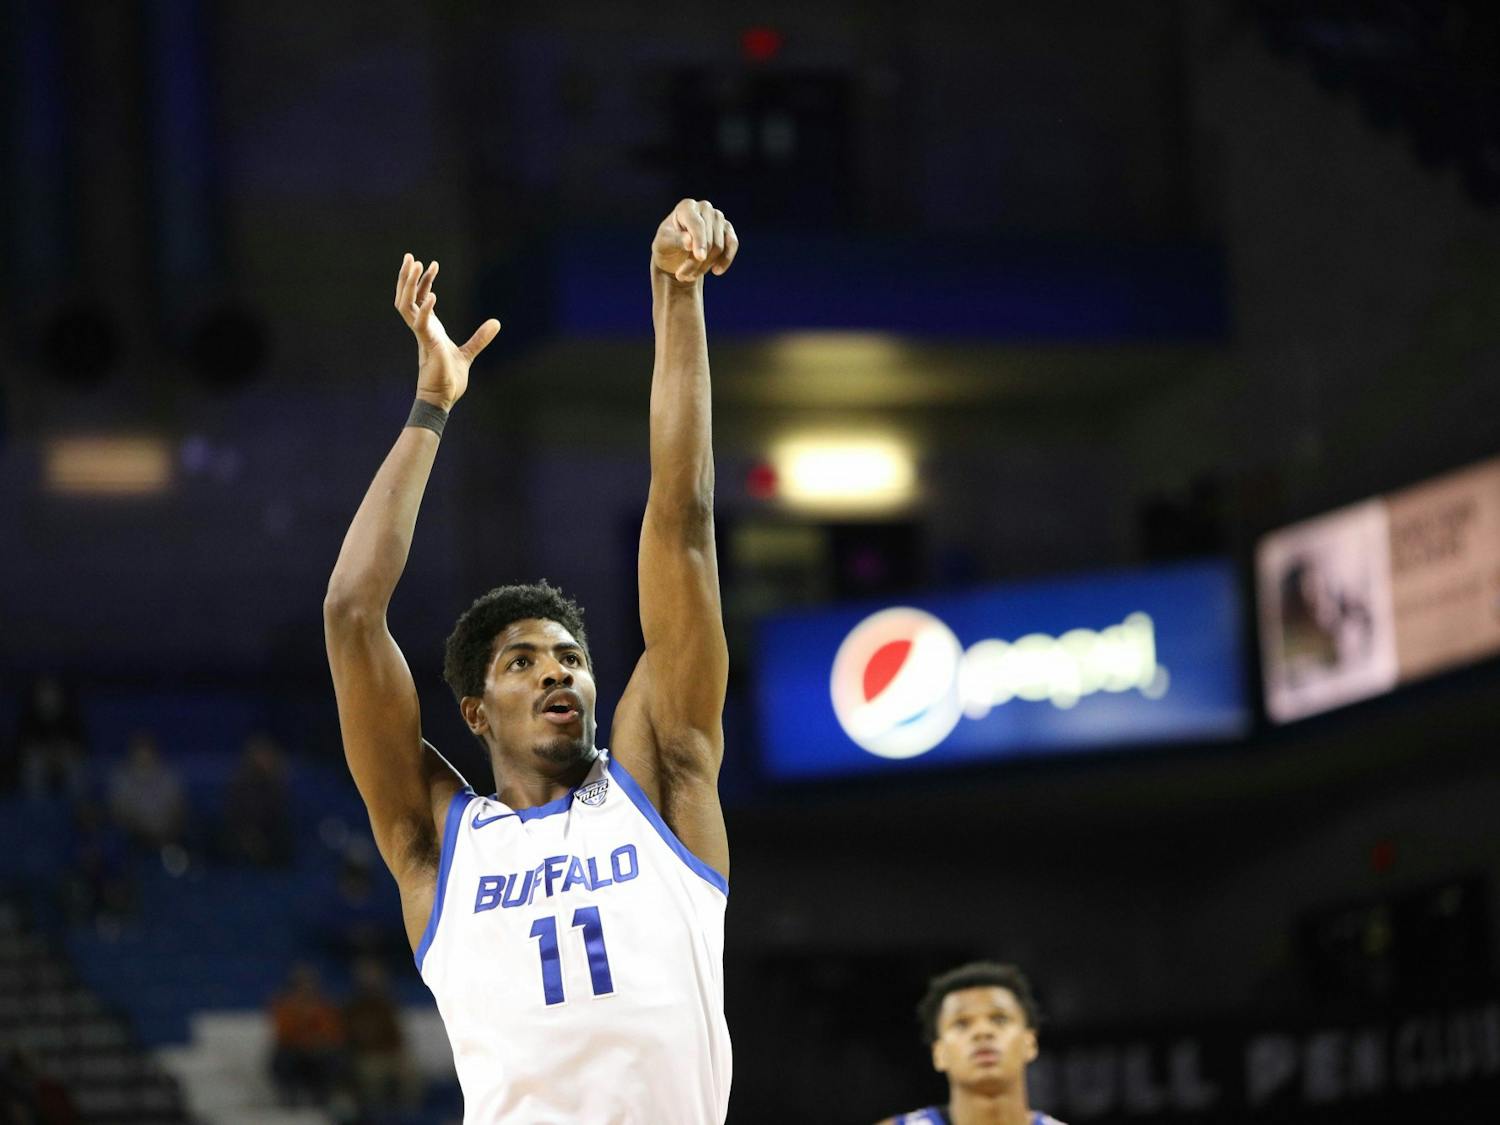 Senior forward Jeenathan Williams led all scorers with 17 points in UB's 70-60 victory over Northern Illinois Saturday.